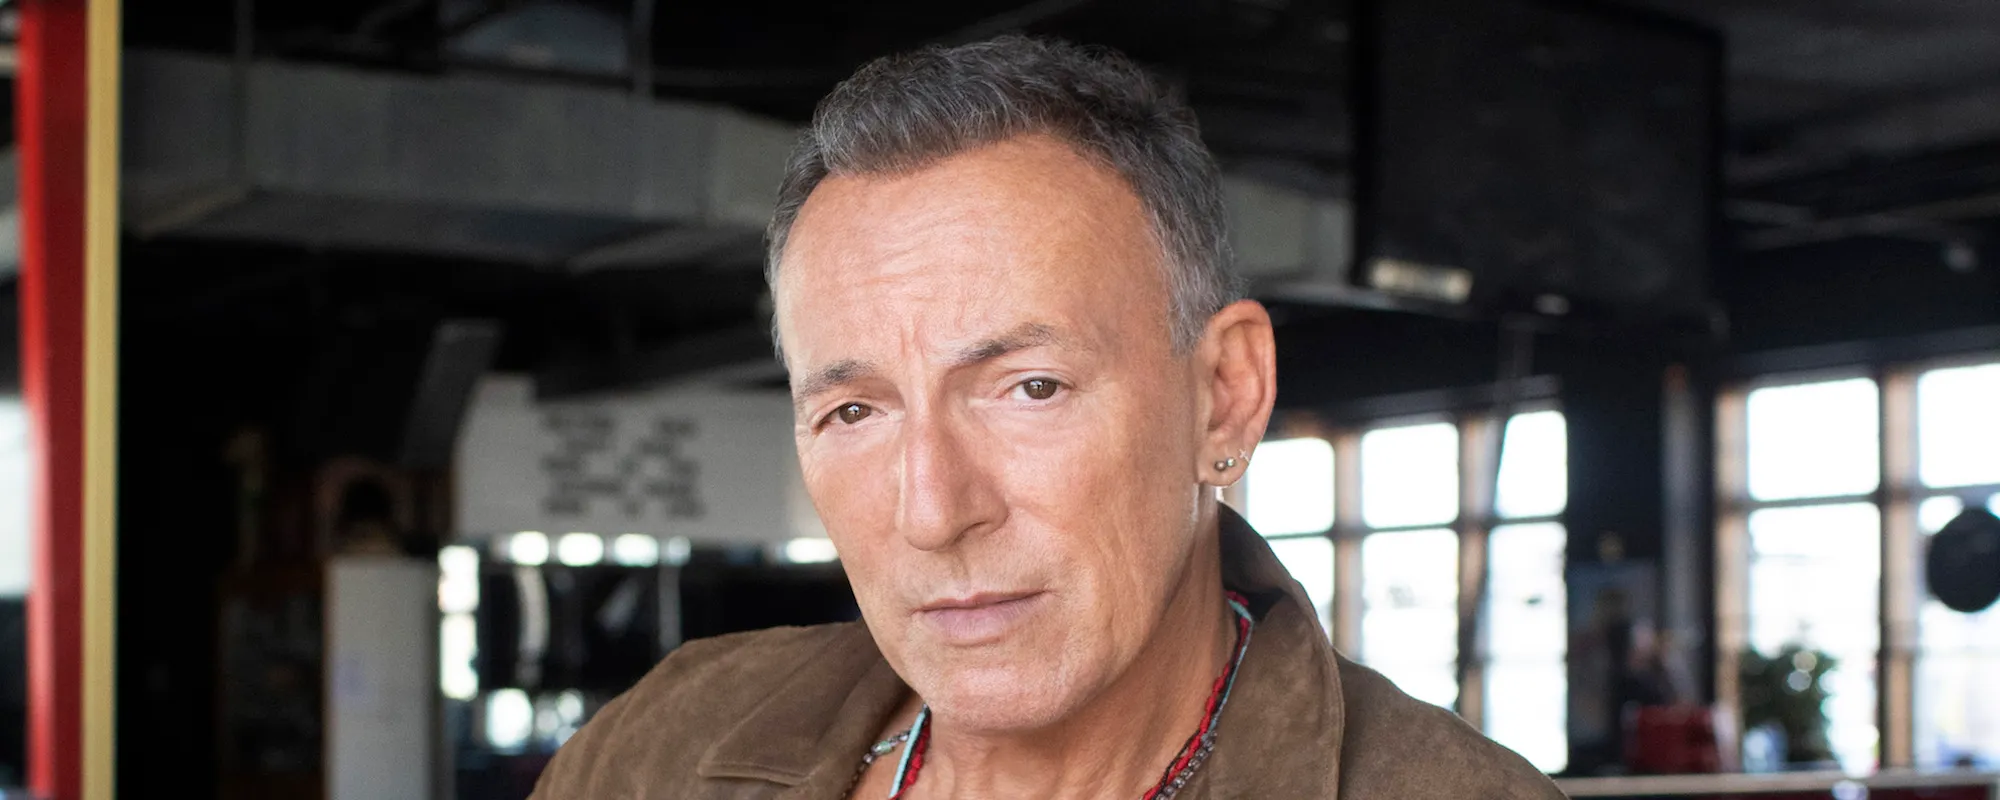 Bruce Springsteen’s Manager Comes to Defense of Client Amidst Ticketing Cost Controversy